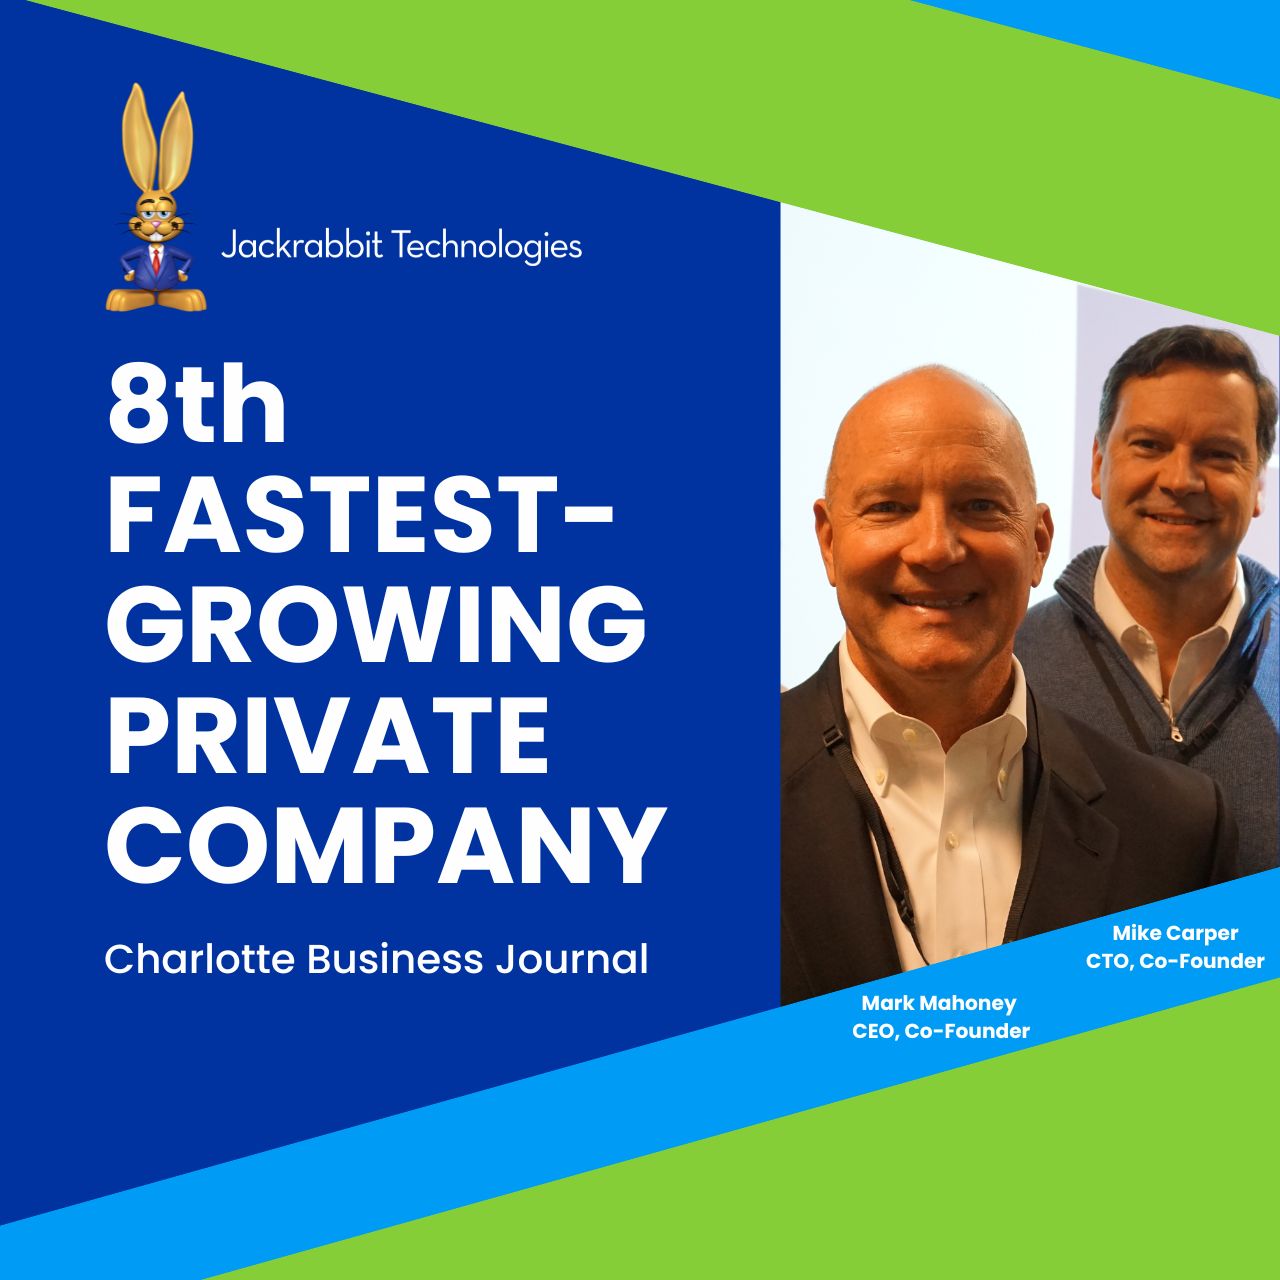 jackrabbit 8th fastest growing private company